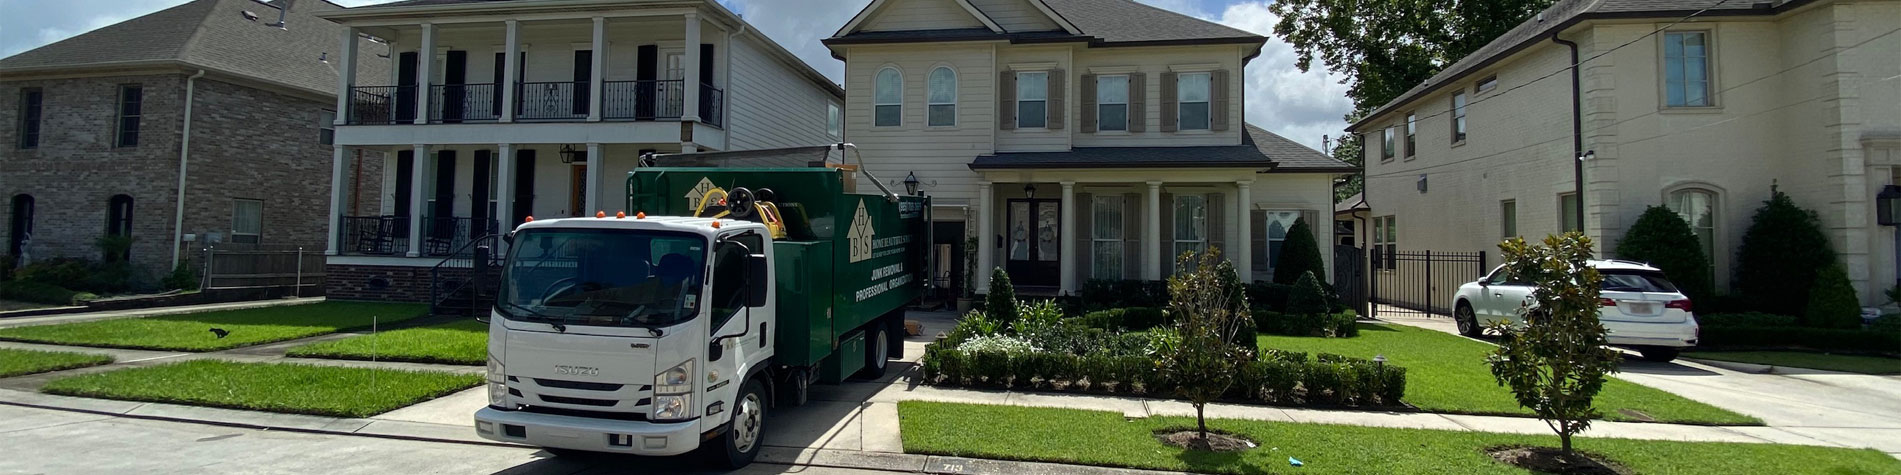 Junk Removal Truck in a New Orleans Neighborhood Completing Junk Removal Work